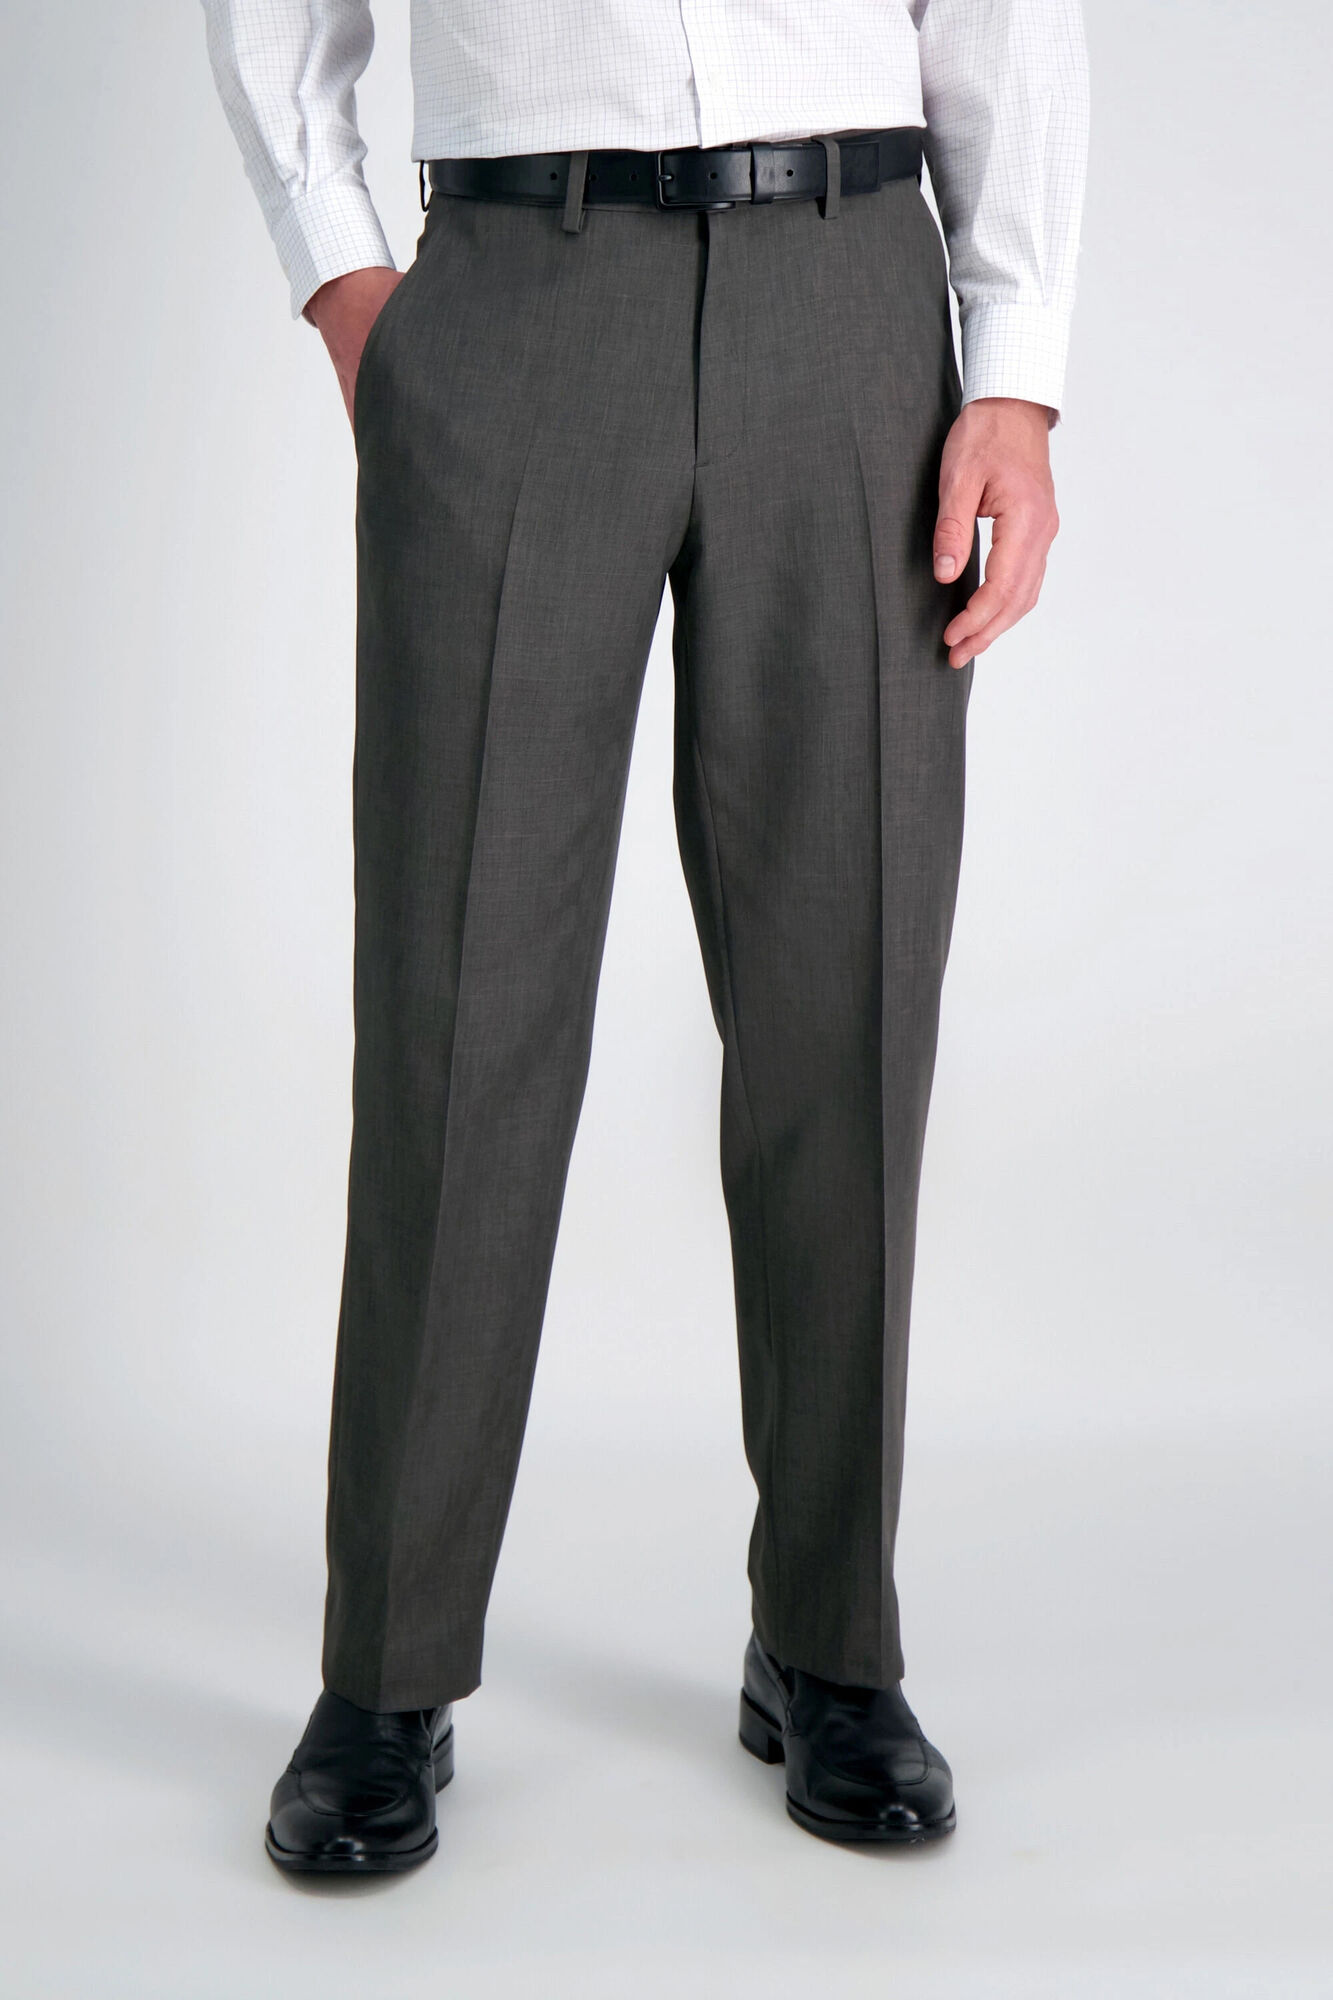 Haggar Travel Performance Suit Separates Pant Brown Heather (HY70278 Clothing Pants) photo